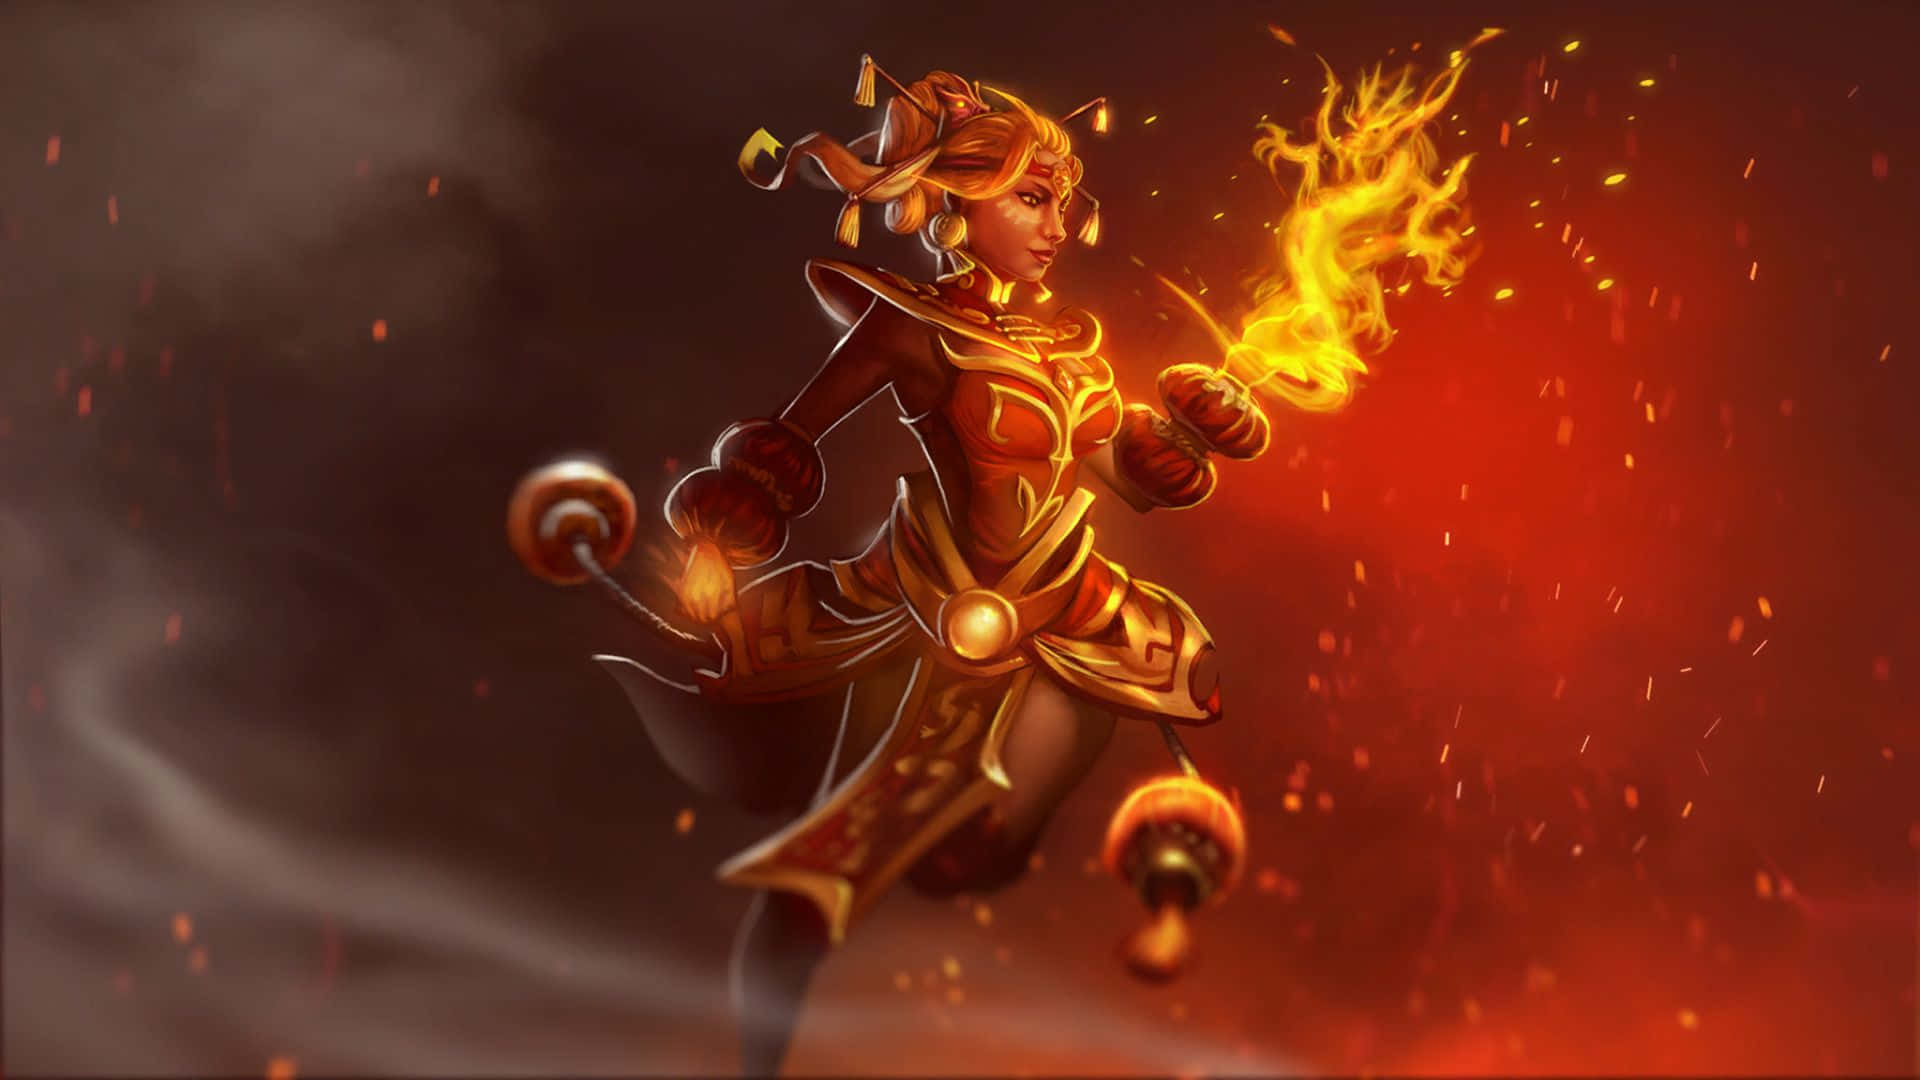 Caption: Dazzling Flames of Lina - The Fiery Slayer of Dota 2 Wallpaper